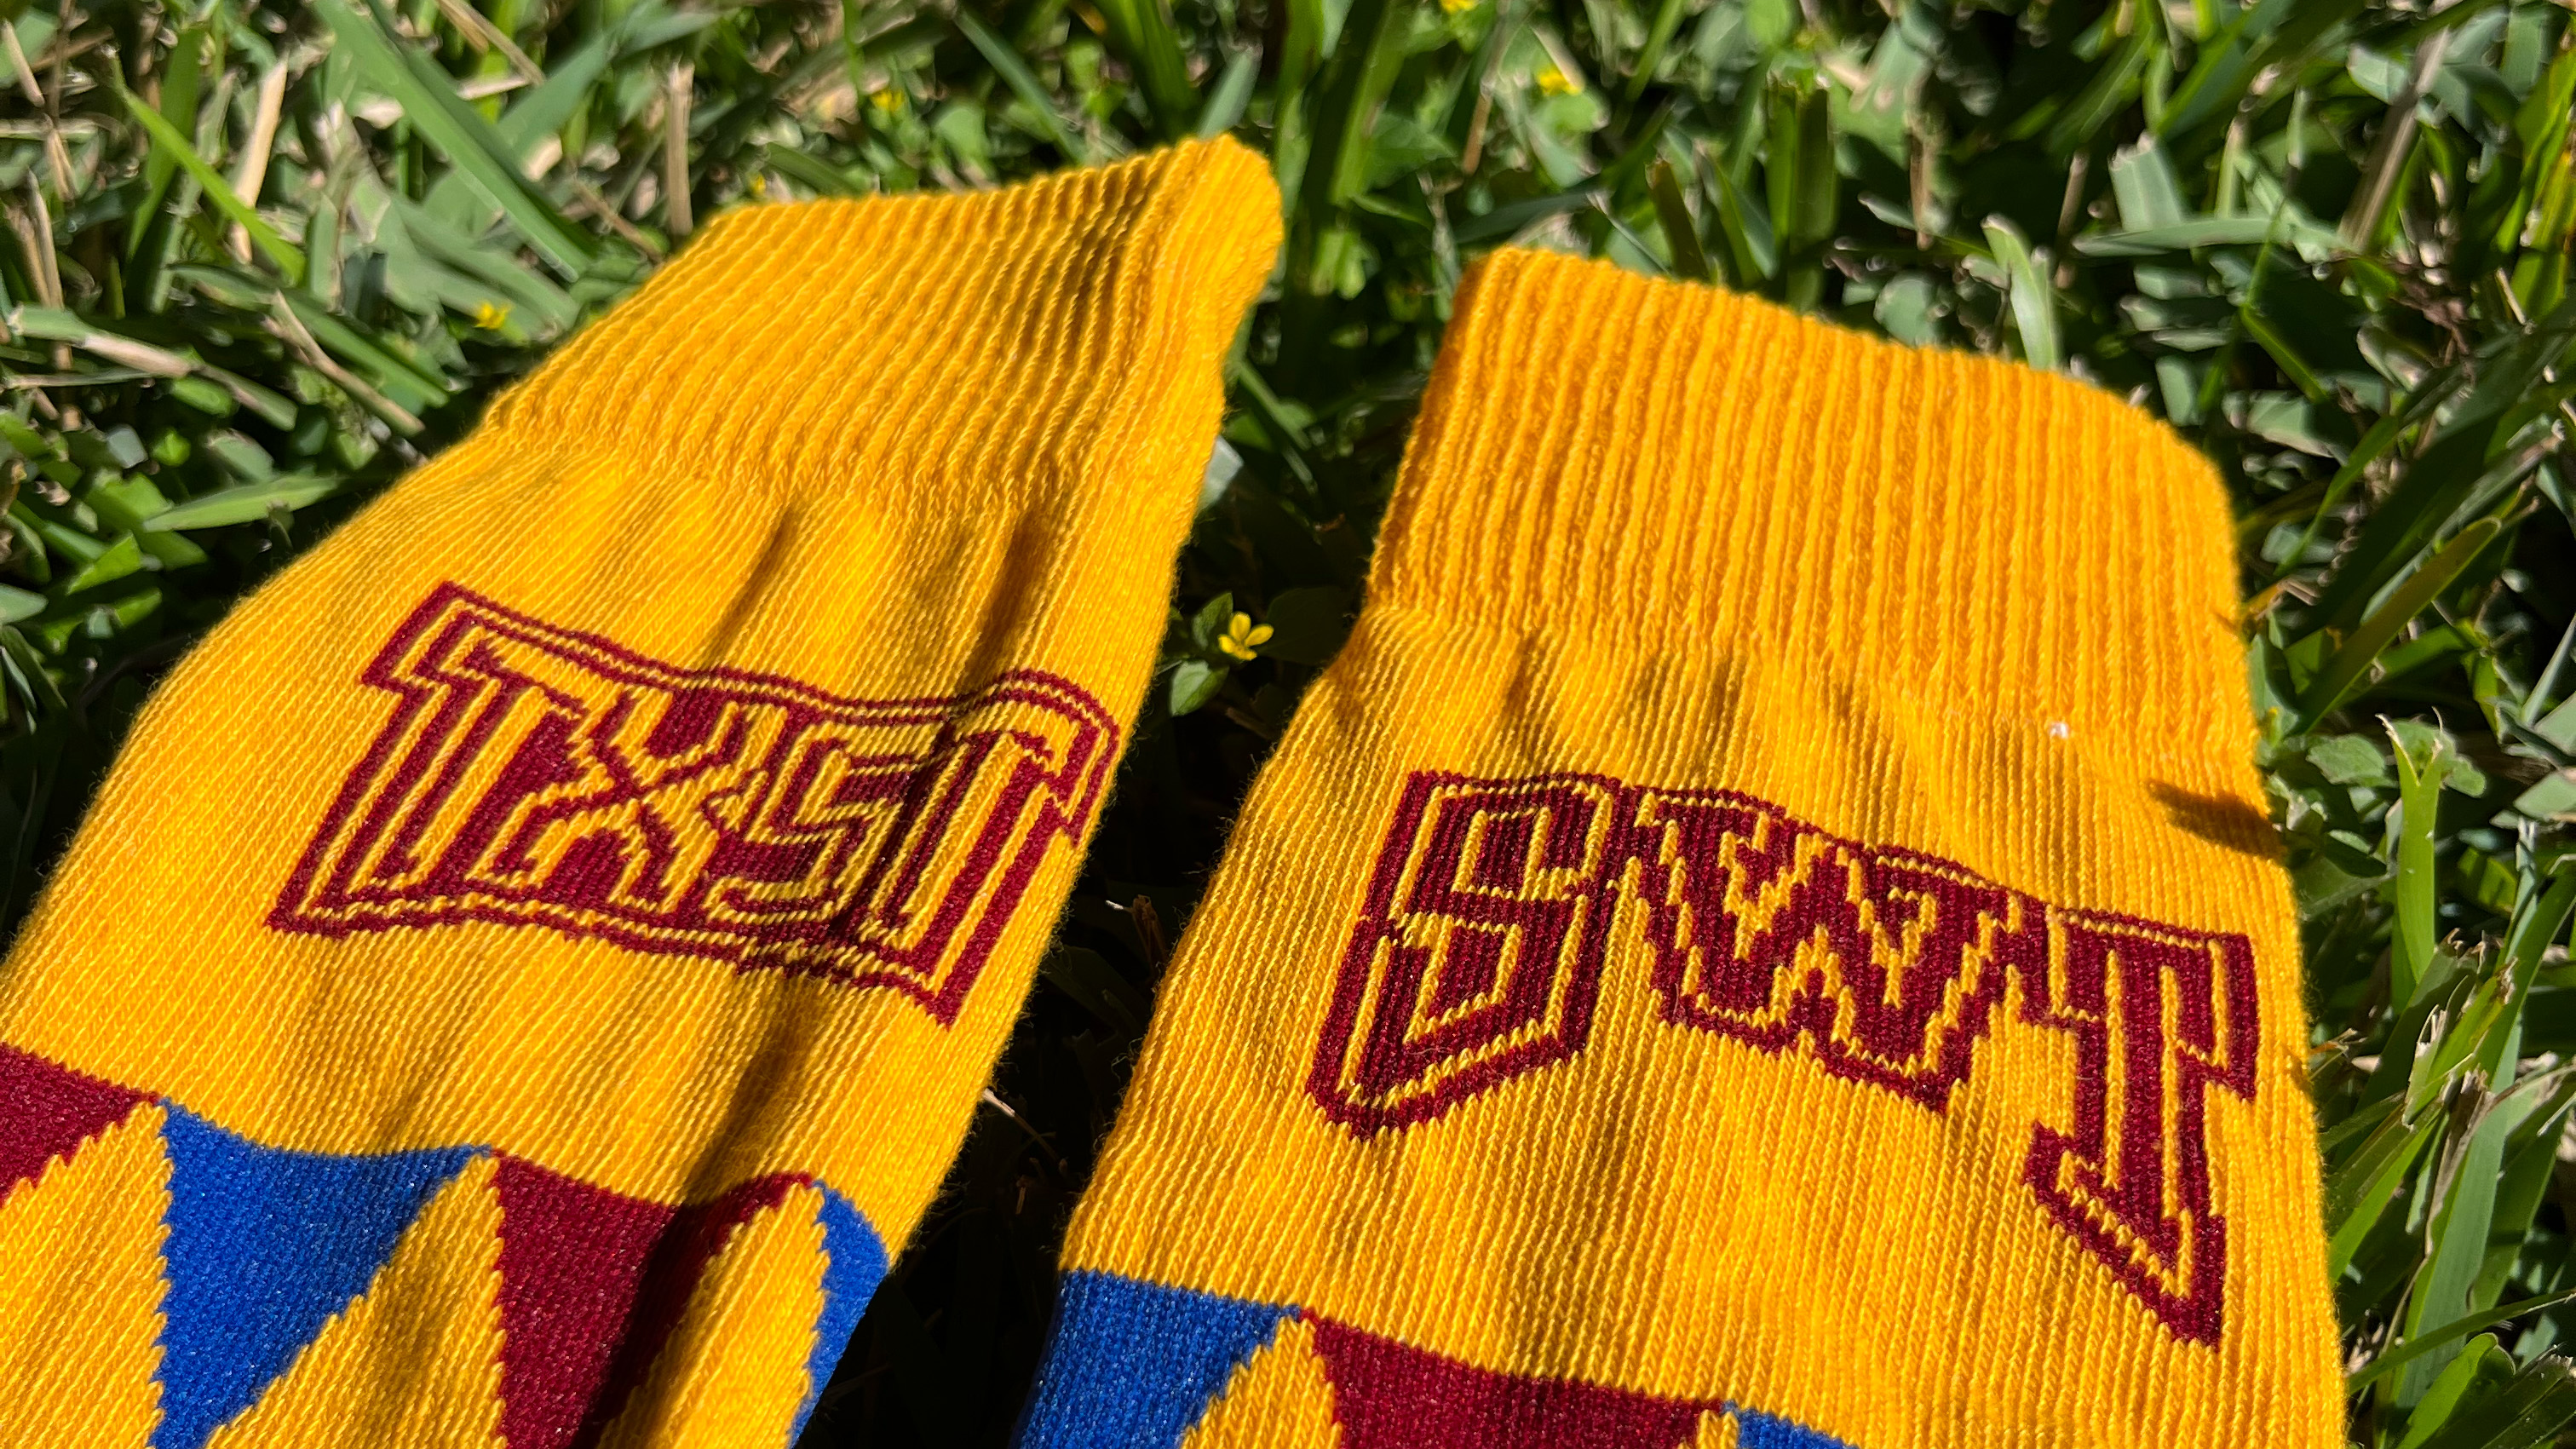 Yellow gold socks with maroon and blue argyle print and TXST logo on one sock and SWT logo on the other sock laying in the grass